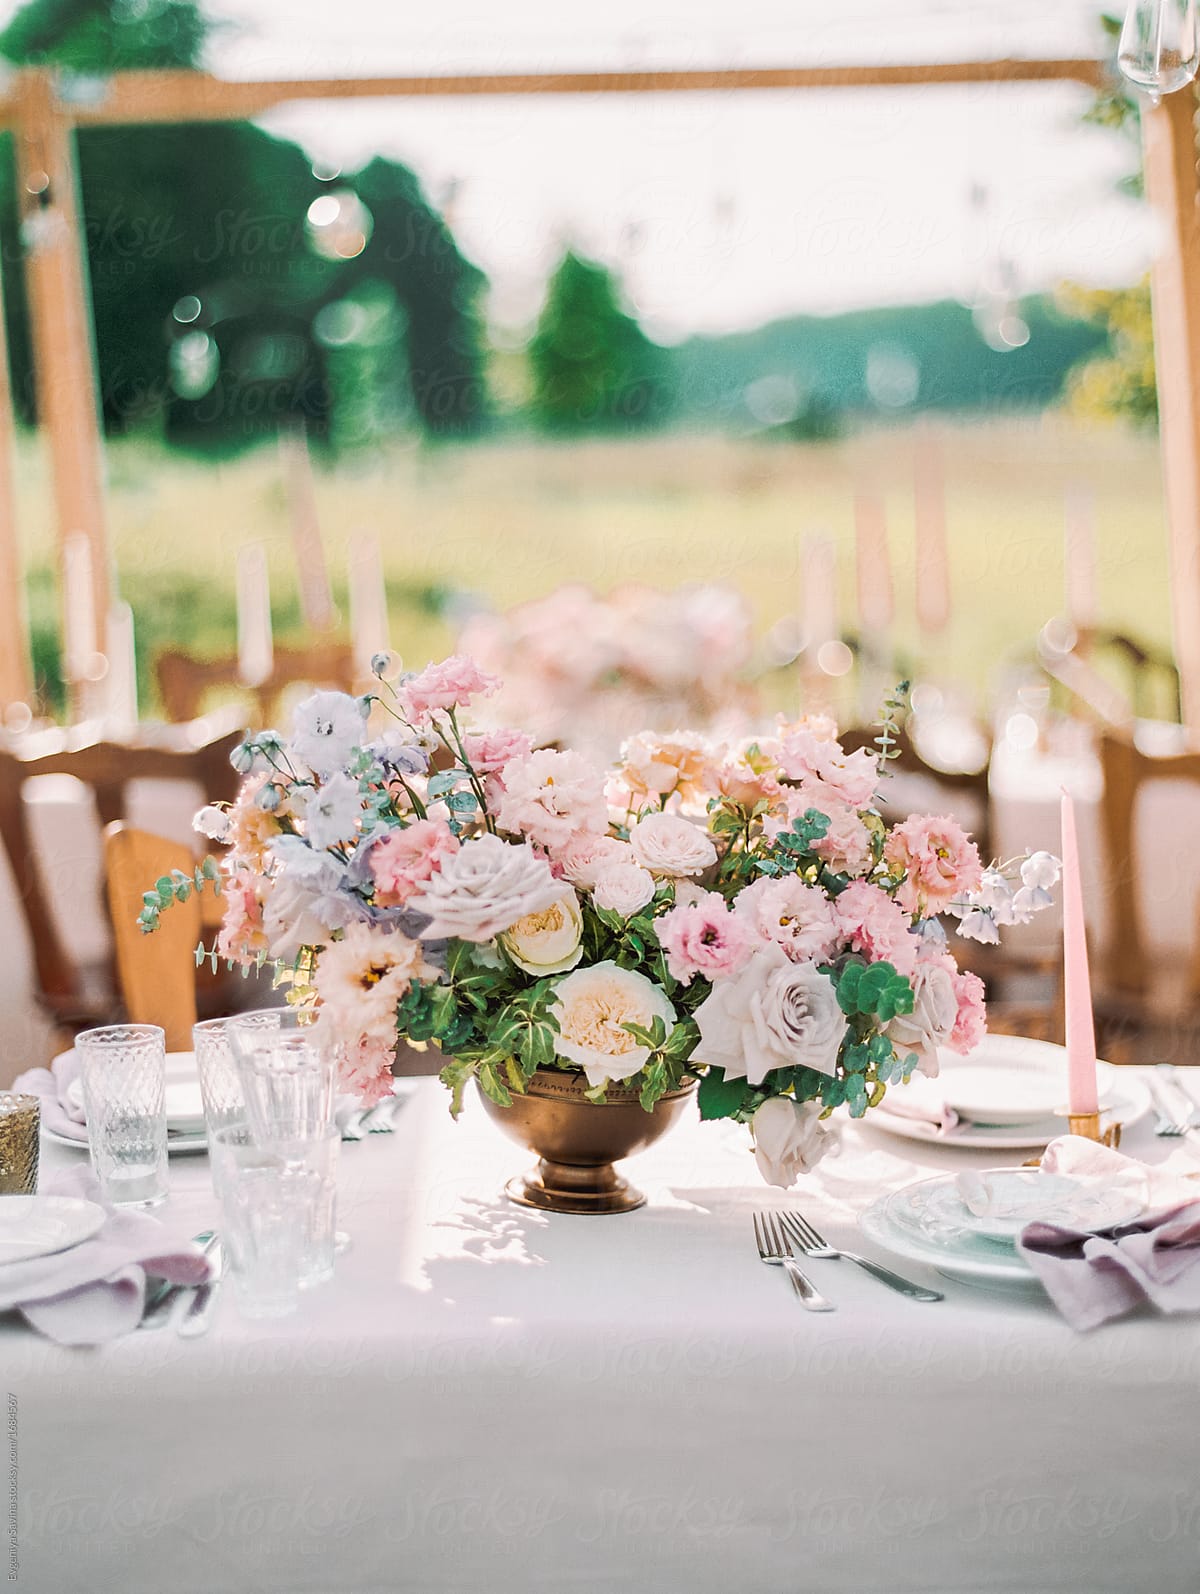 A table setting for a wedding